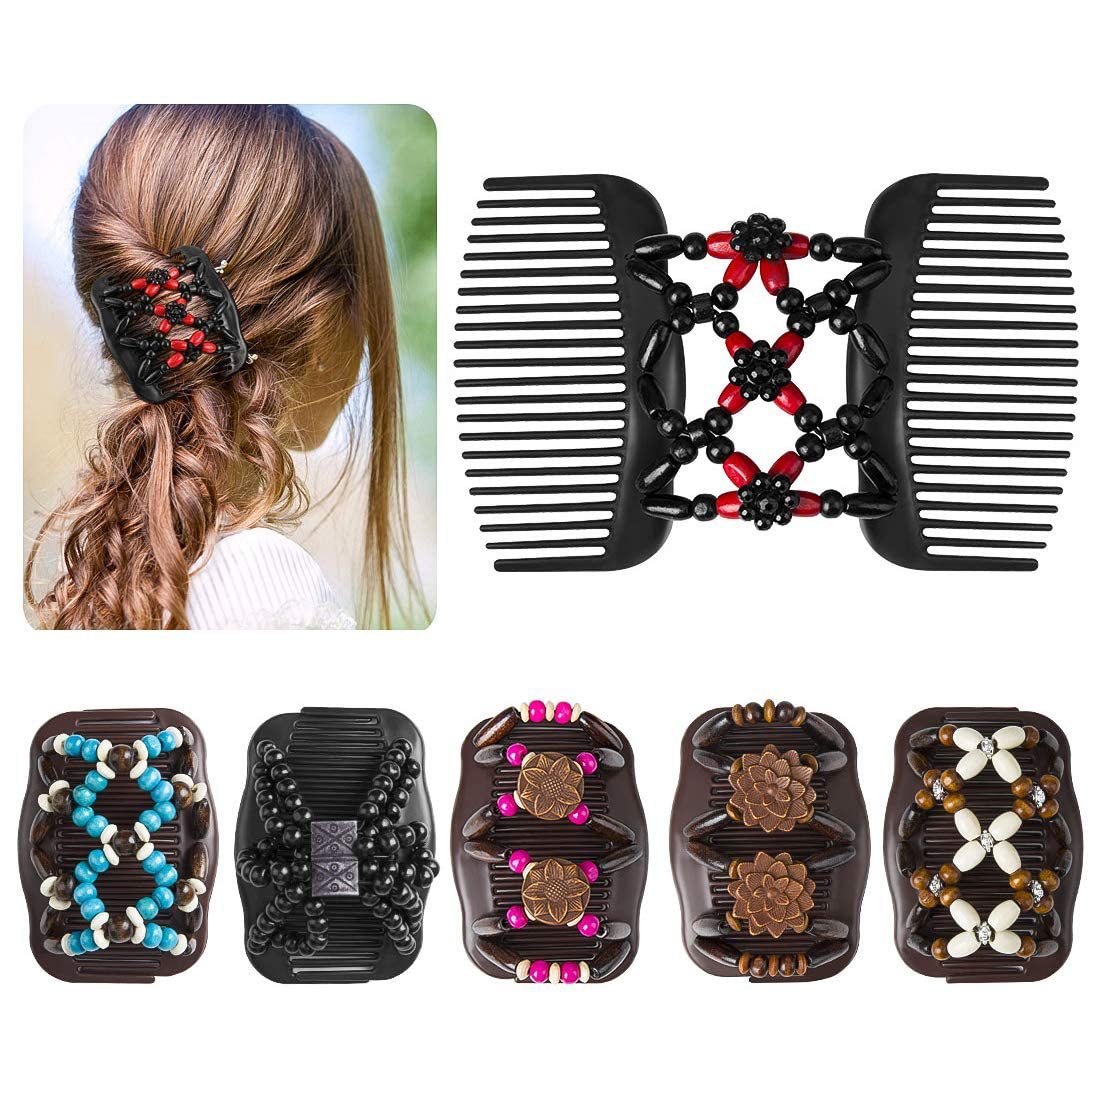 

Handmade Beaded Decor Stretch Comb Magic Beading Hair Comb Double Clips Hair Styling Accessories For Women